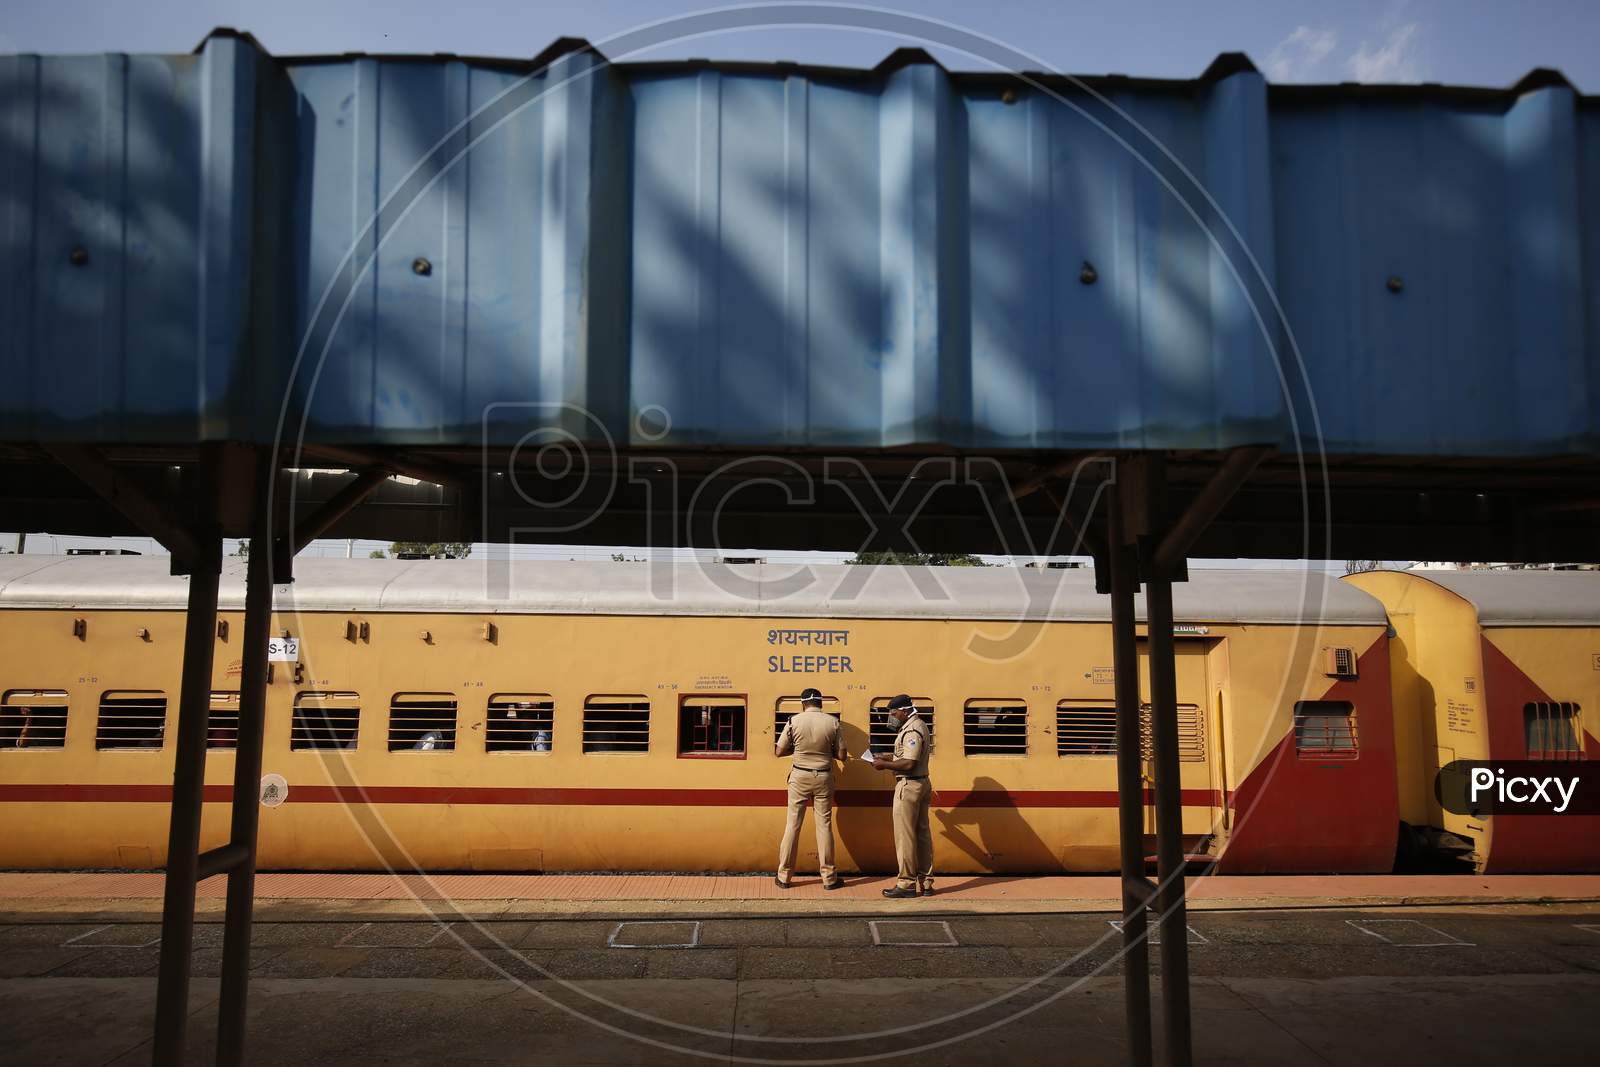 Railway Protection Force (RPF) personnel check travel documents of migrant workers travelling to Danapur, Bihar in a special train arranged by the government to repatriate migrant workers at the Chikkabanavara Junction Railway Station on the outskirts of Bangalore, India.